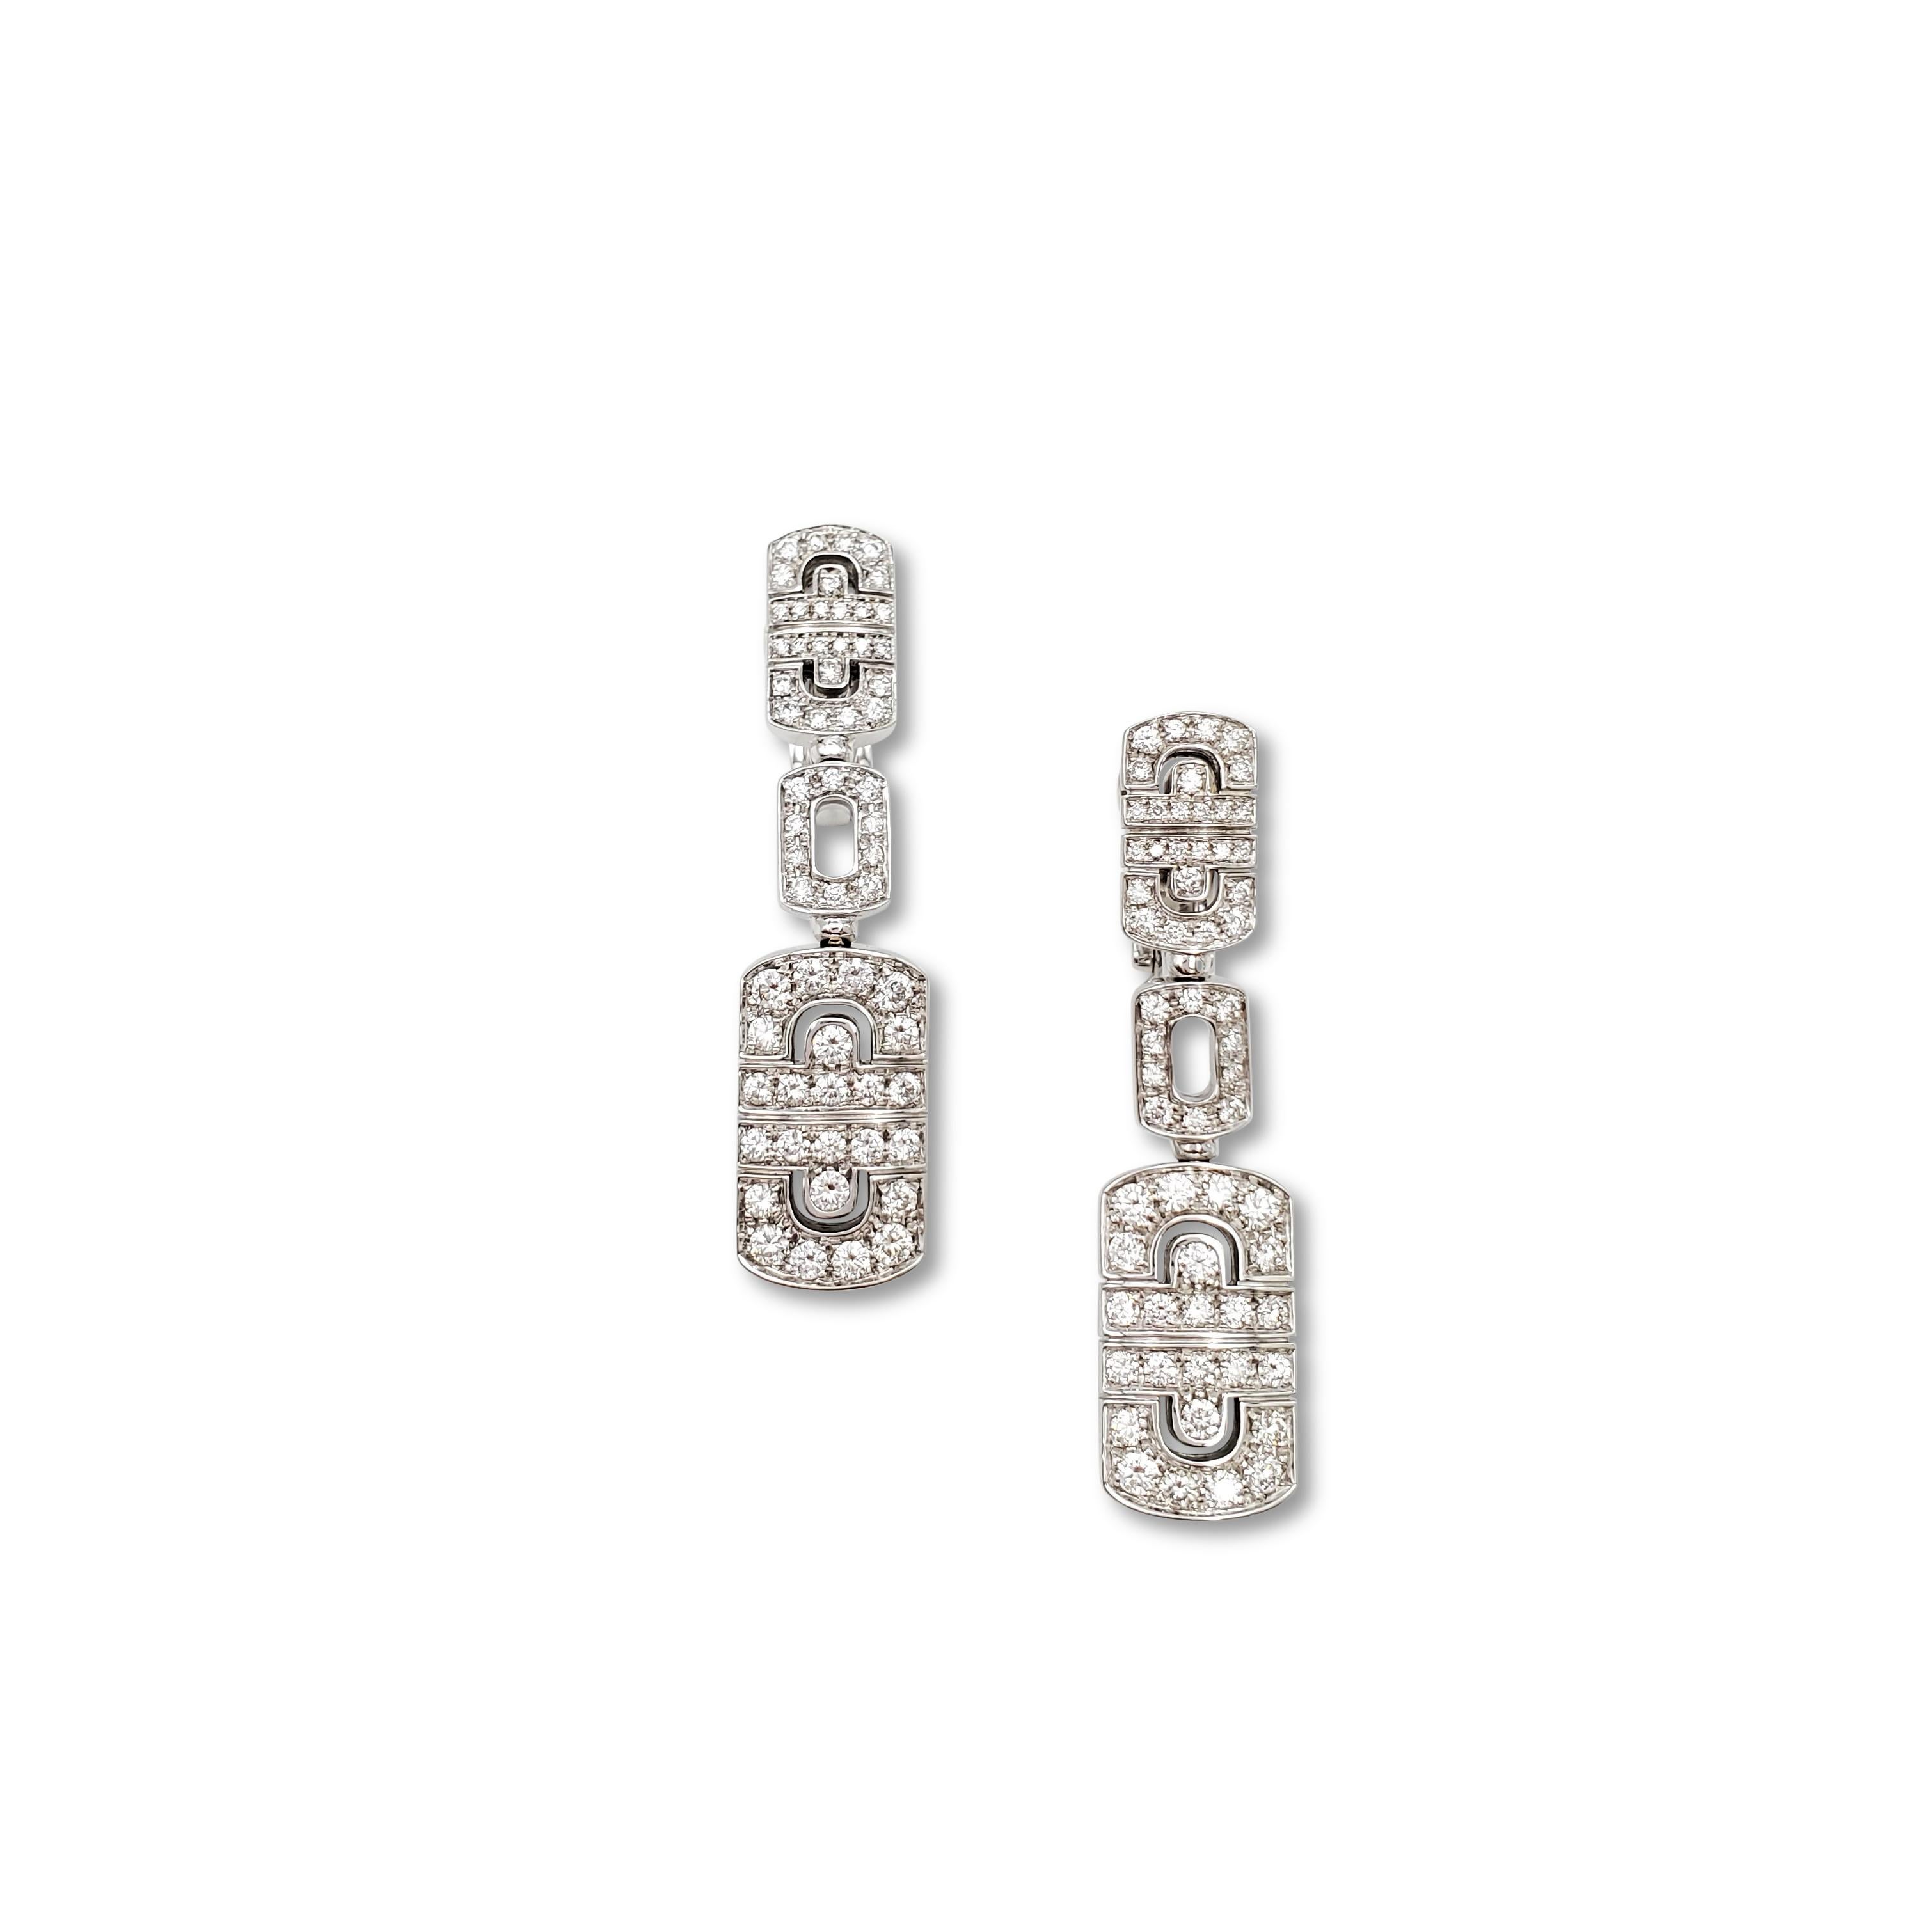 Authentic Bvlgari Parentesi earrings crafted in 18 karat white gold and set with approx. 2.60 carats of round brilliant cut diamonds (F color, VS clarity) total weight. Signed Bulgari, 750, Made in Italy, with serial number. The earrings measure 43